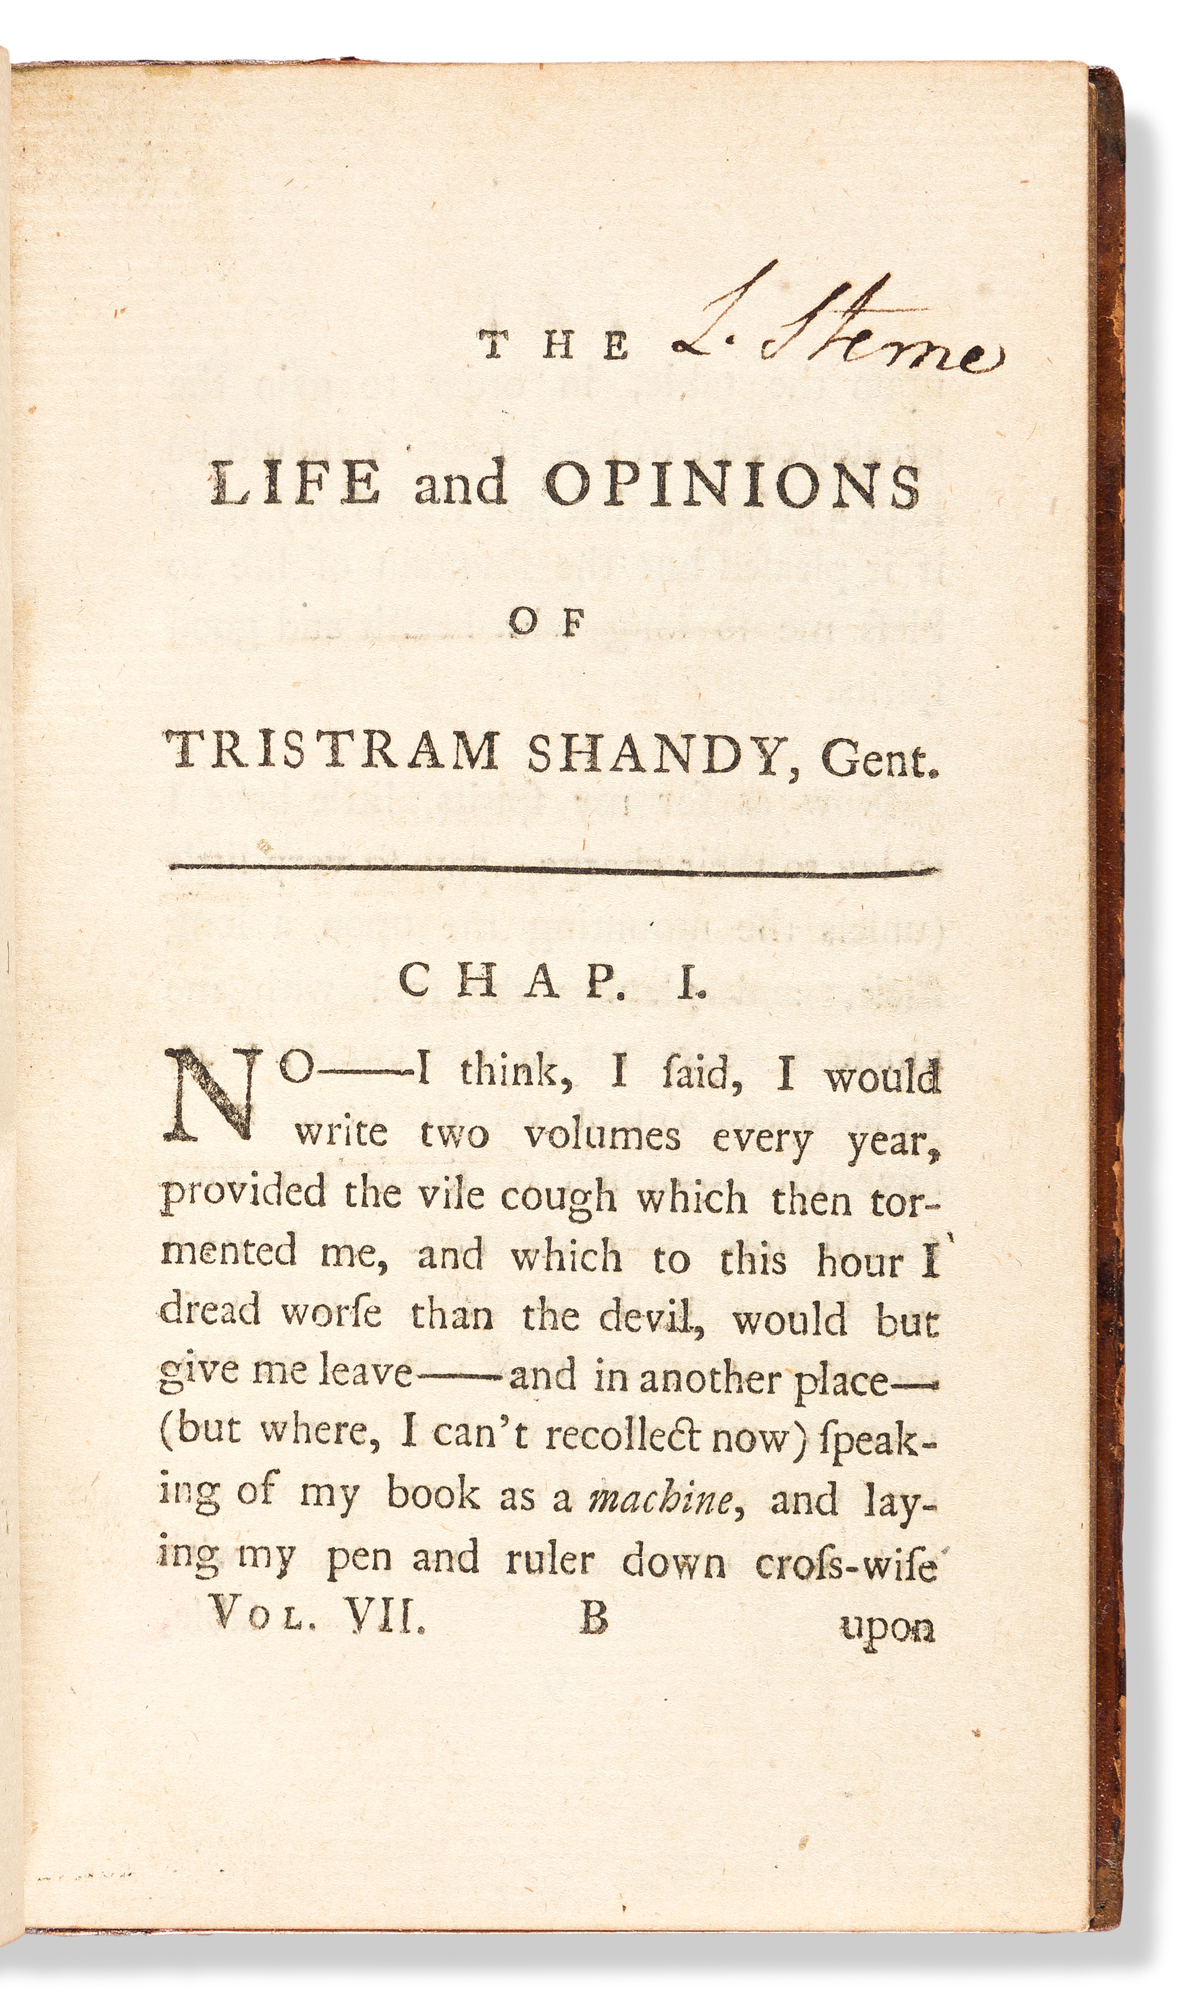 Sterne, Laurence (1713-1768) The Life and Opinions of Tristram Shandy, Gentleman.